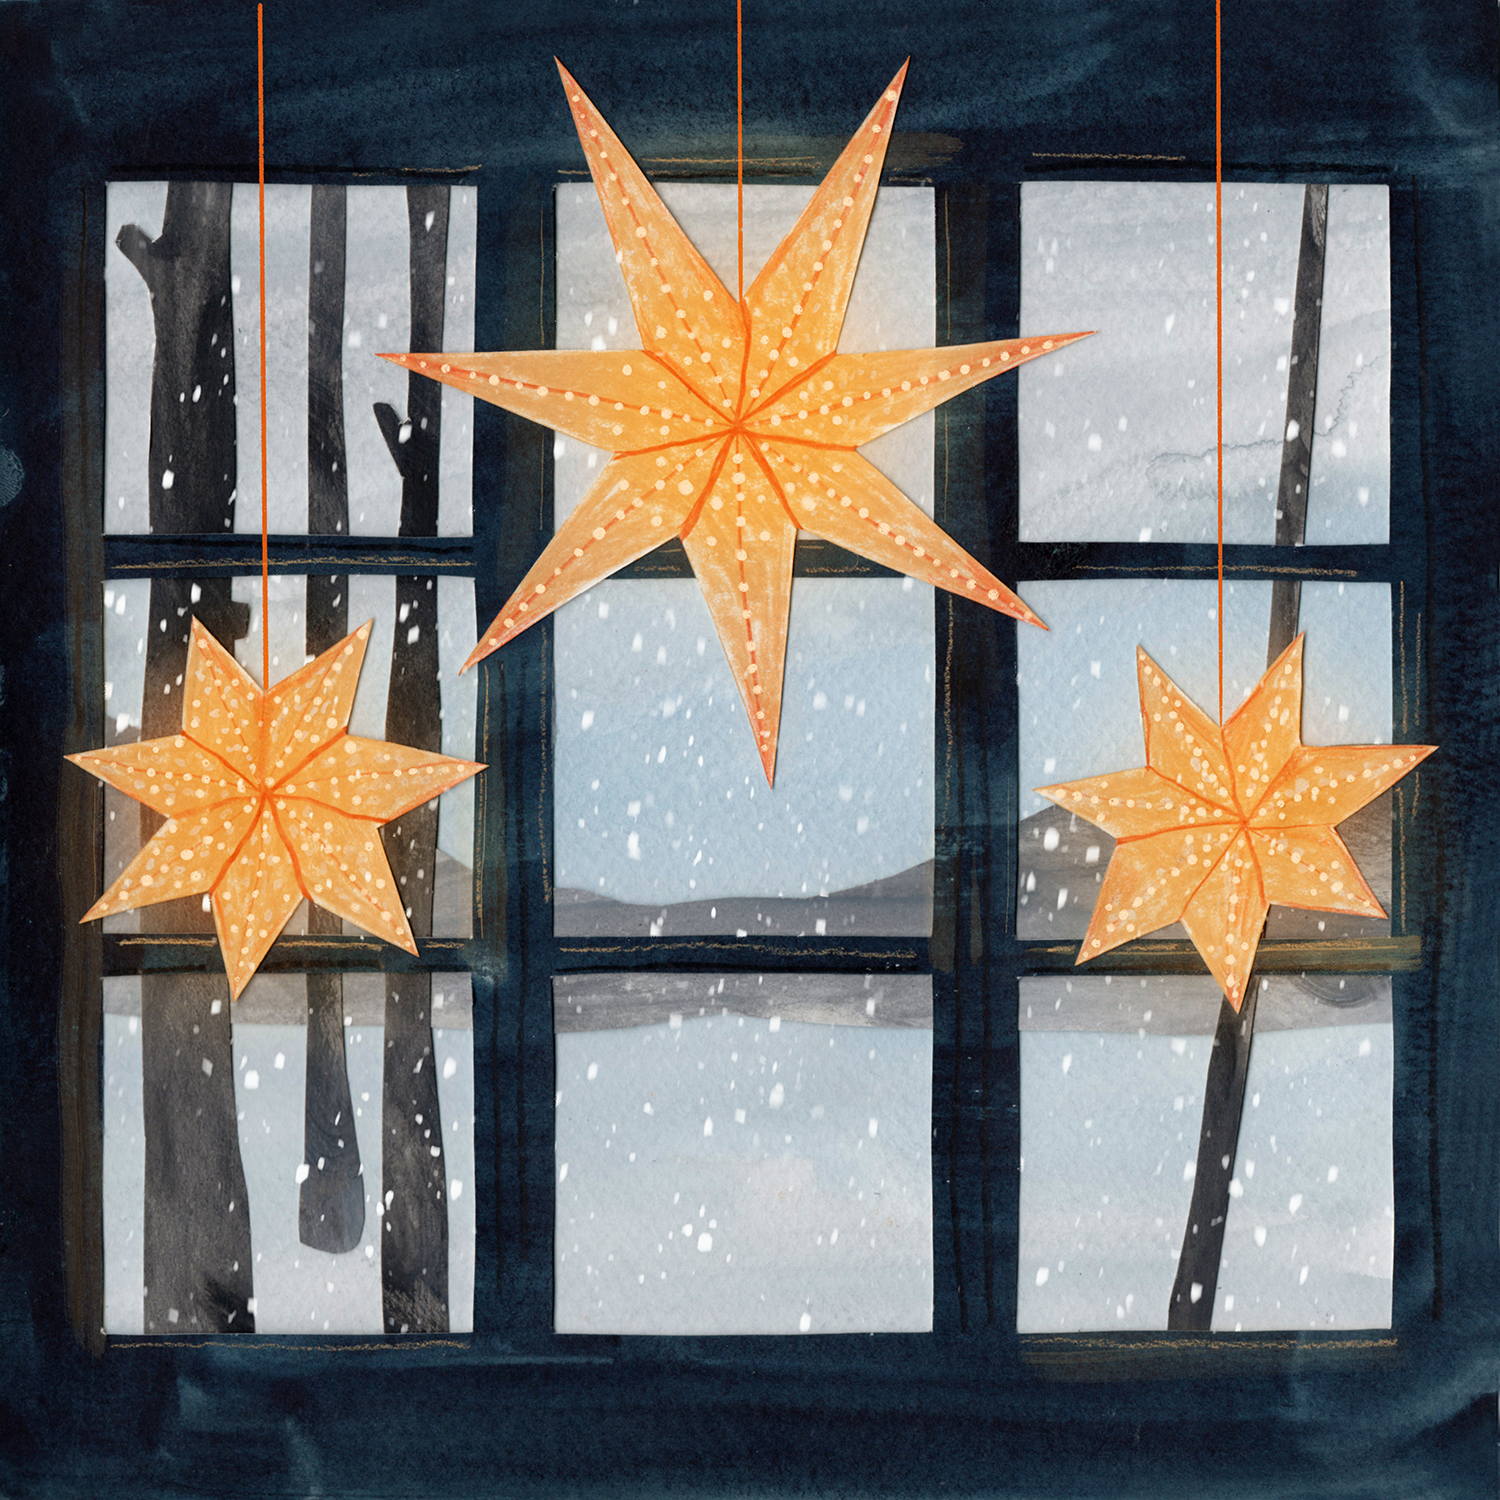 Christmas lights in the shape of stars in the windows in Sweden/Scandinavia, Ikea star lights, illustrated hygge Christmas winter, www.Fenne.be